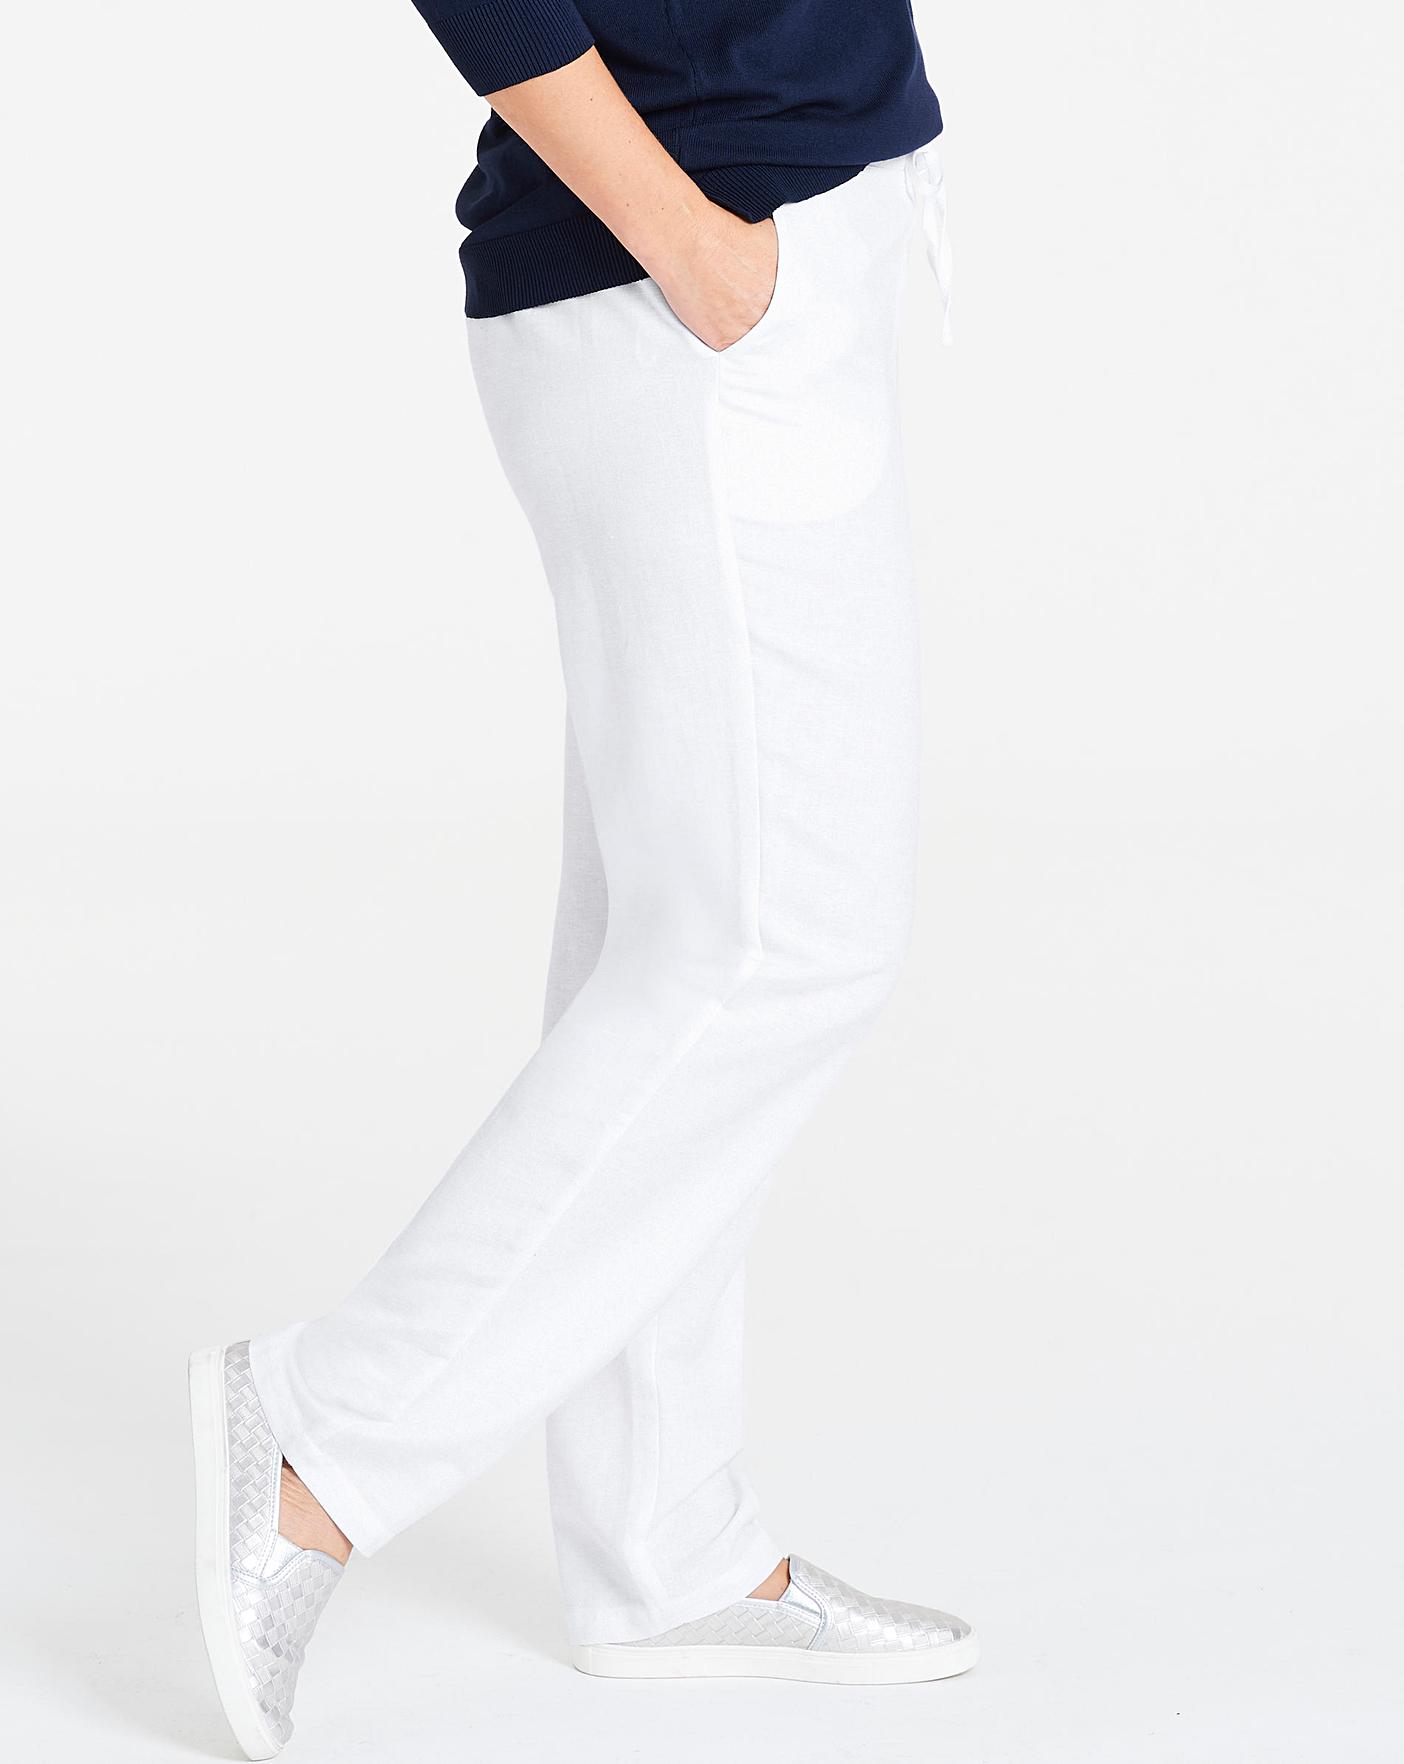 white tapered linen trousers